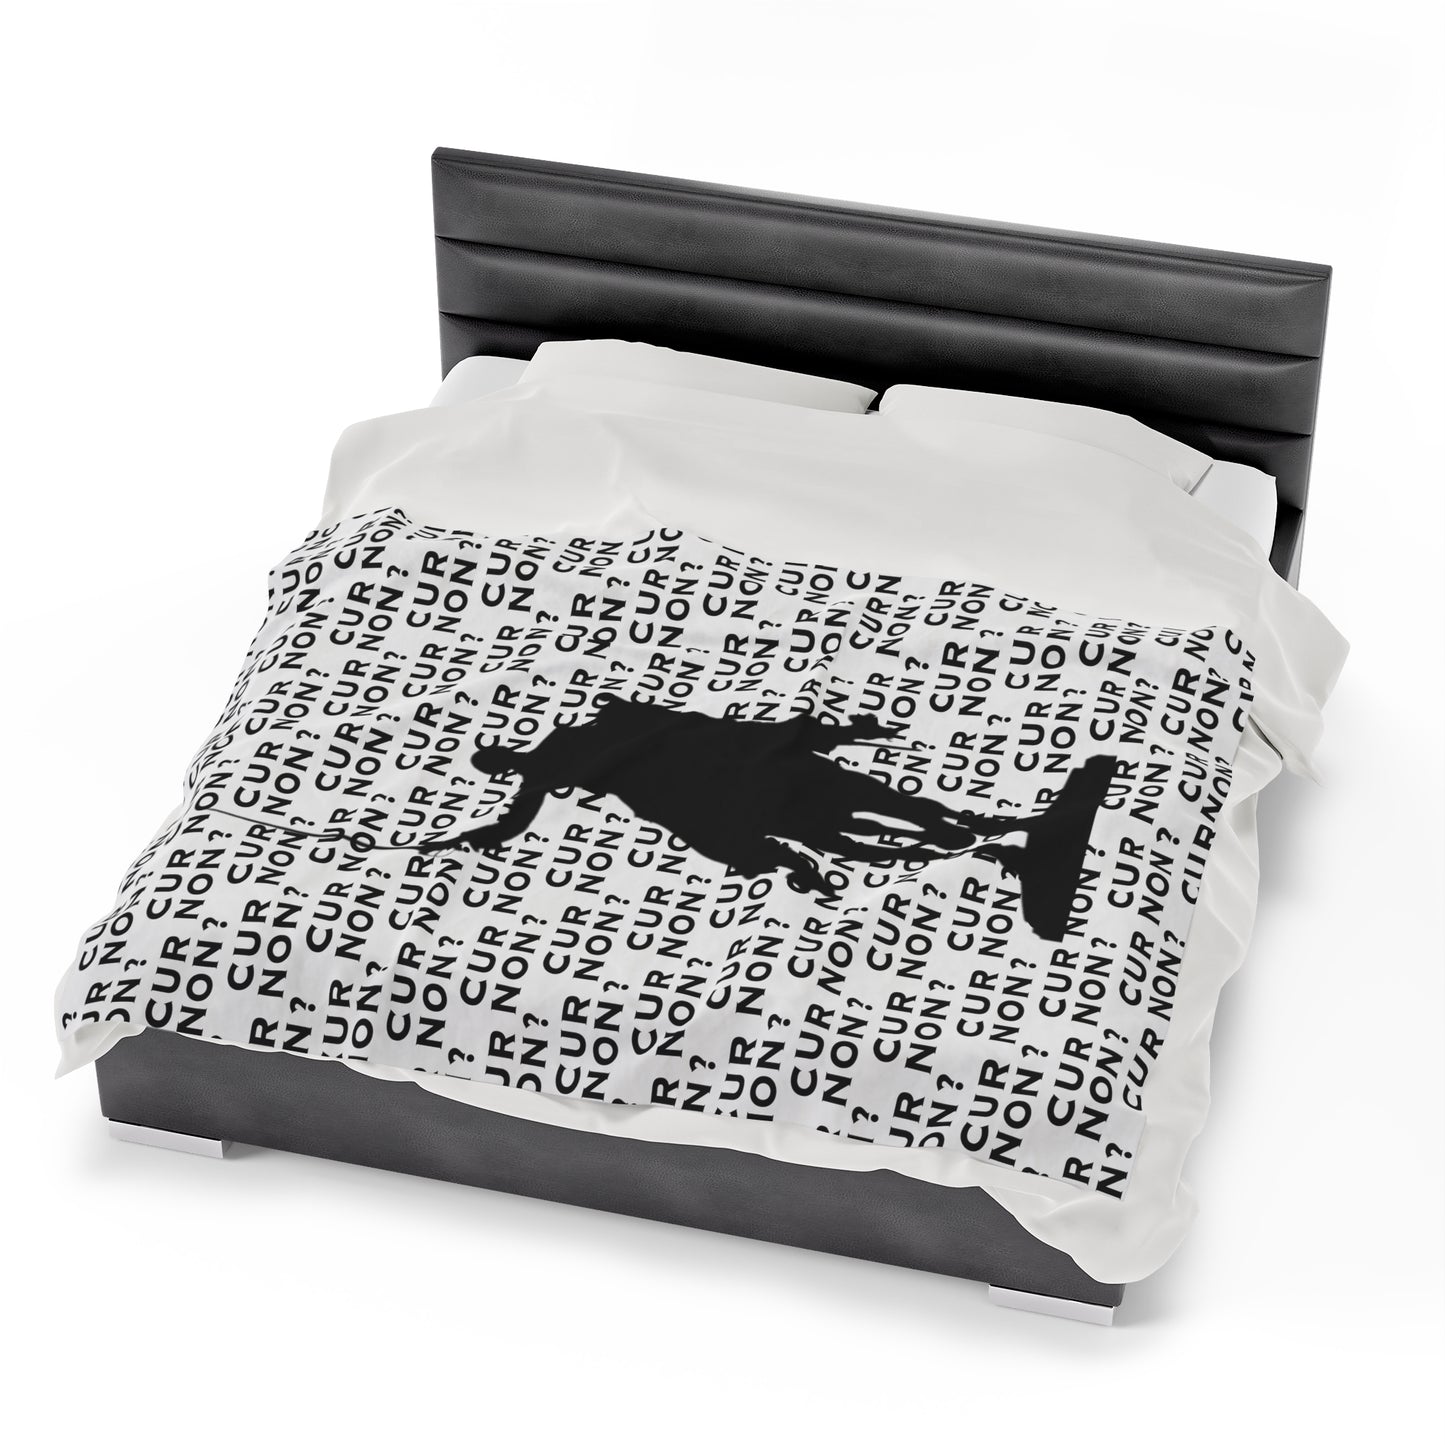 lafayette blanket Marquis de Lafayette silhouette and cur non motto on a blanket in black and white